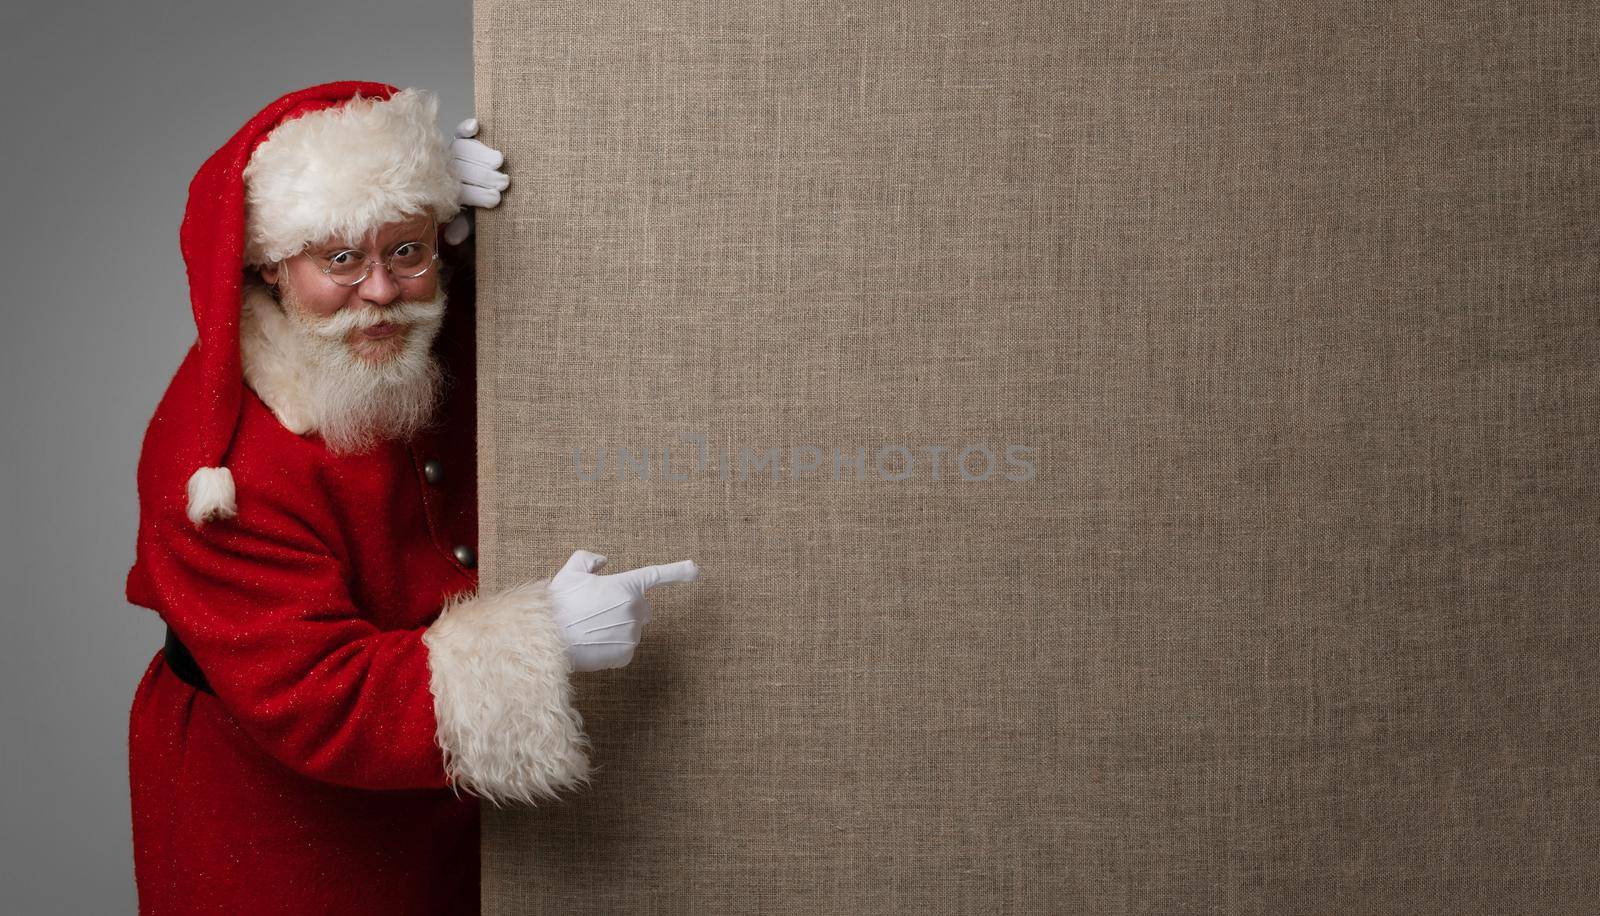 Santa Claus pointing at fabric billboard with copy space for text